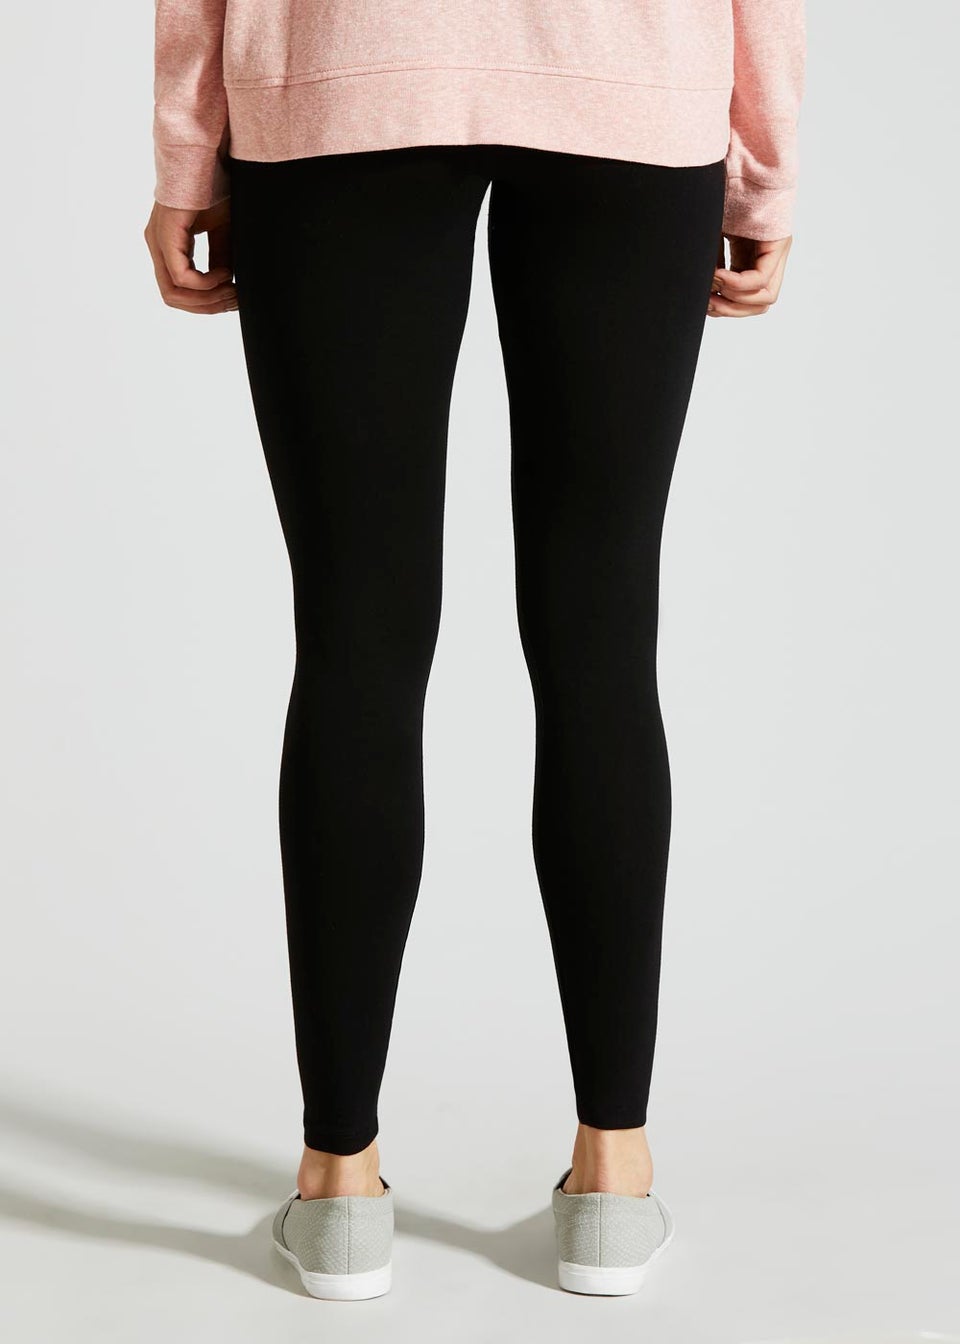 Matalan Leggings With Zips OFF-63% >Free Delivery, 45% OFF